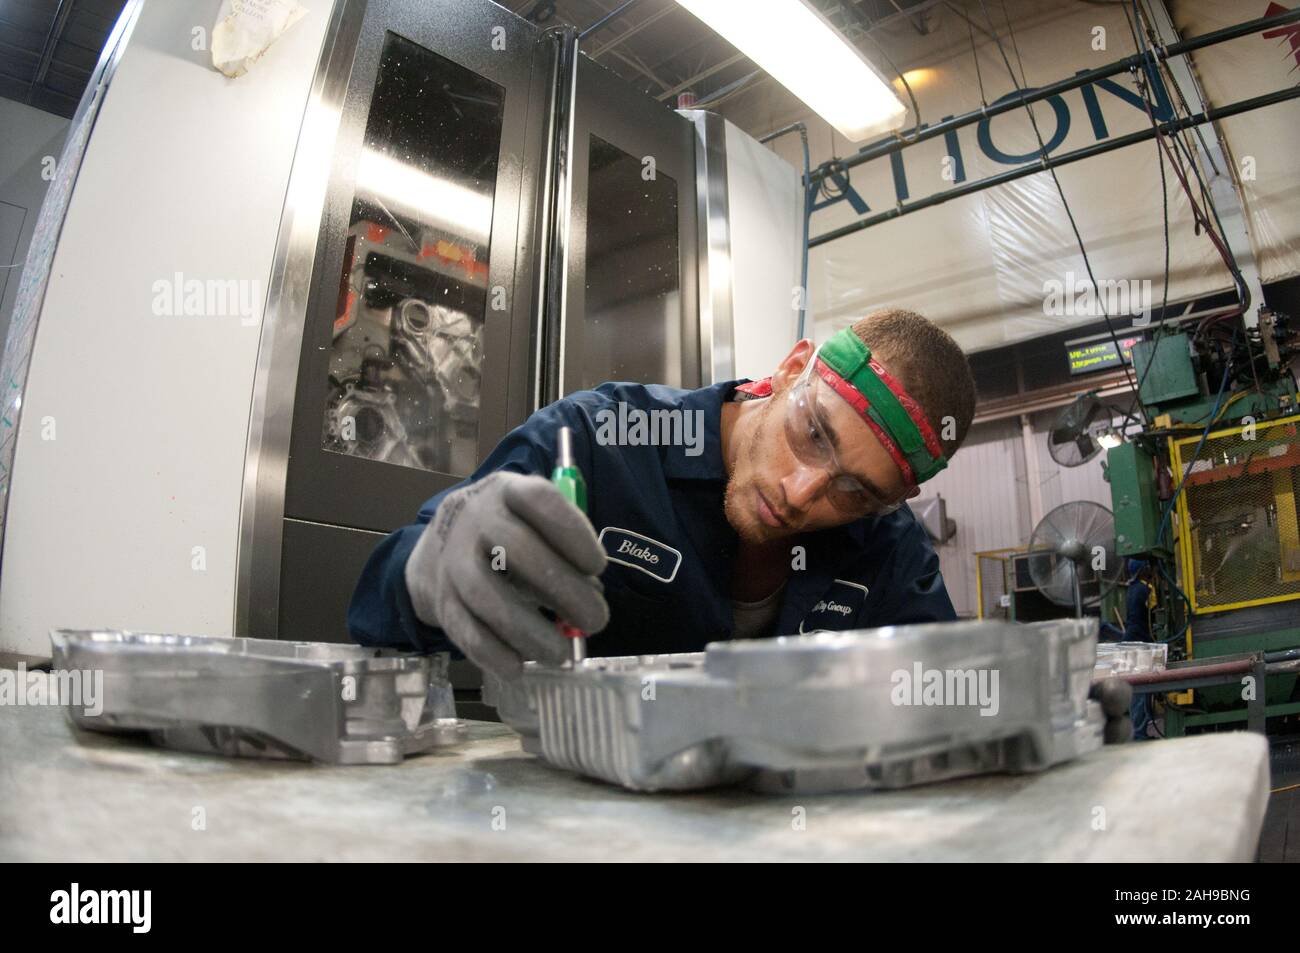 Computer Numerical Control (CNC) machine operator Blake Veeneman makes a process inspection after a casting is machined at Port City Group’s Port City Castings Corporation manufactures high-pressure aluminum die-castings, mostly for the automotive industry, in Muskegon, MI, facility on Wednesday July 20, 2011.  Port City Group boosted its employment by 12 percent over last year thanks to two Rural Business Guaranteed Loans totaling $9.6 million. In its 80,000 sq. ft. facility, machines that range from 800 – 1,600 tons, and cast A380 aluminum alloy products from melted ingots of aluminum, into Stock Photo